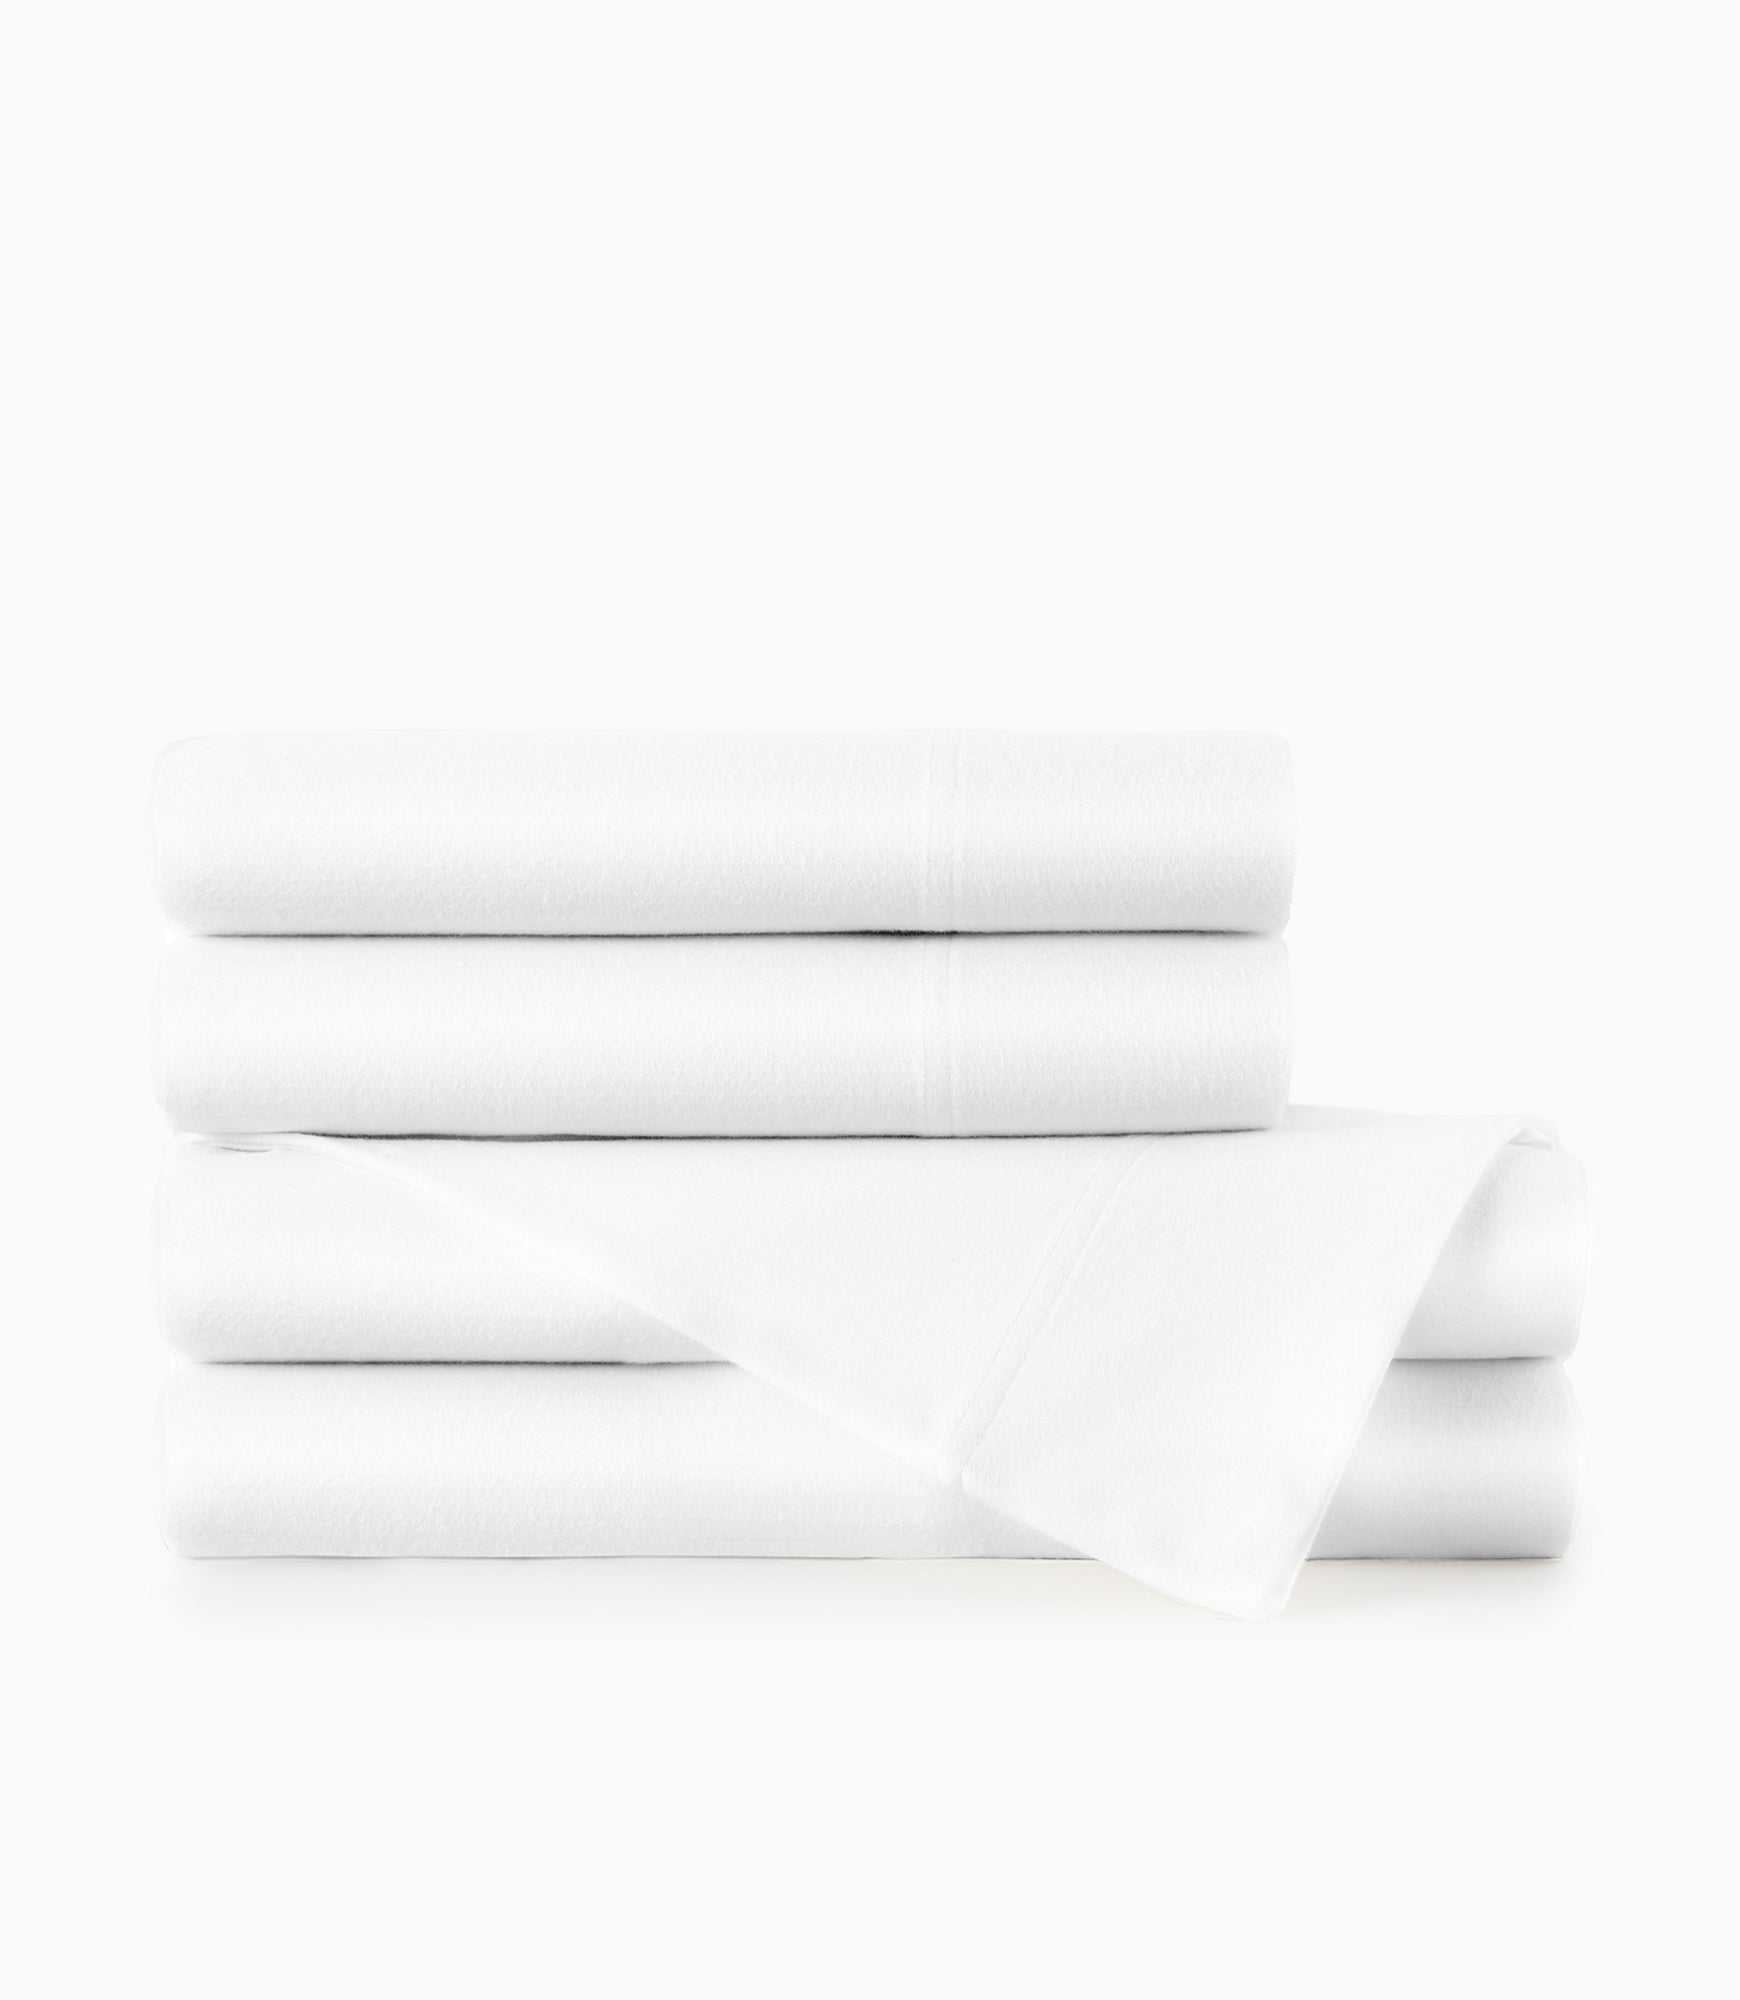 Peacock Alley Egyptian Cotton Flannel Sheet Set